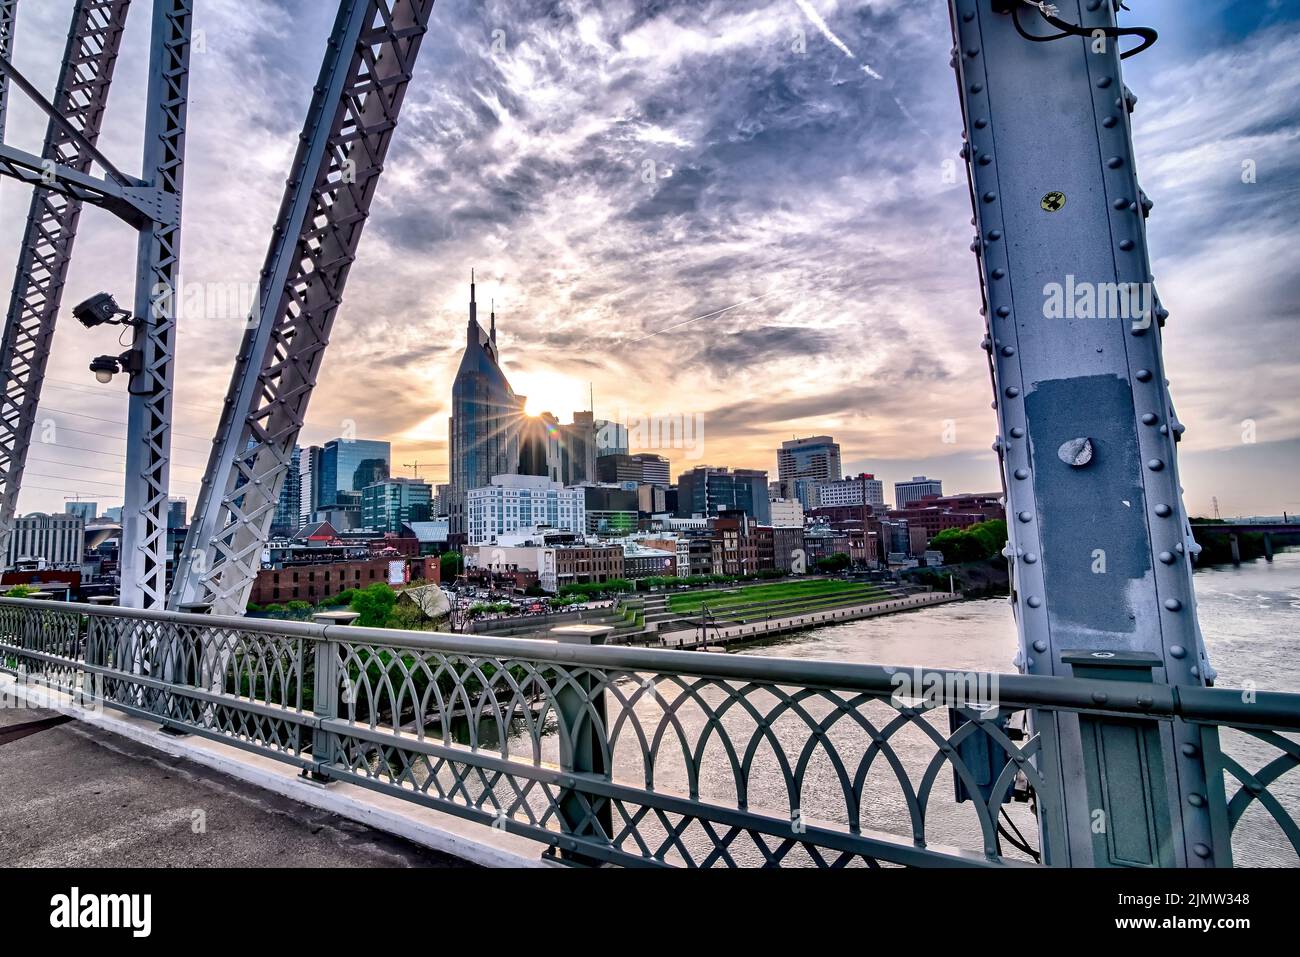 Nashville tennessee city skyline at sunset on the waterfrom Stock Photo